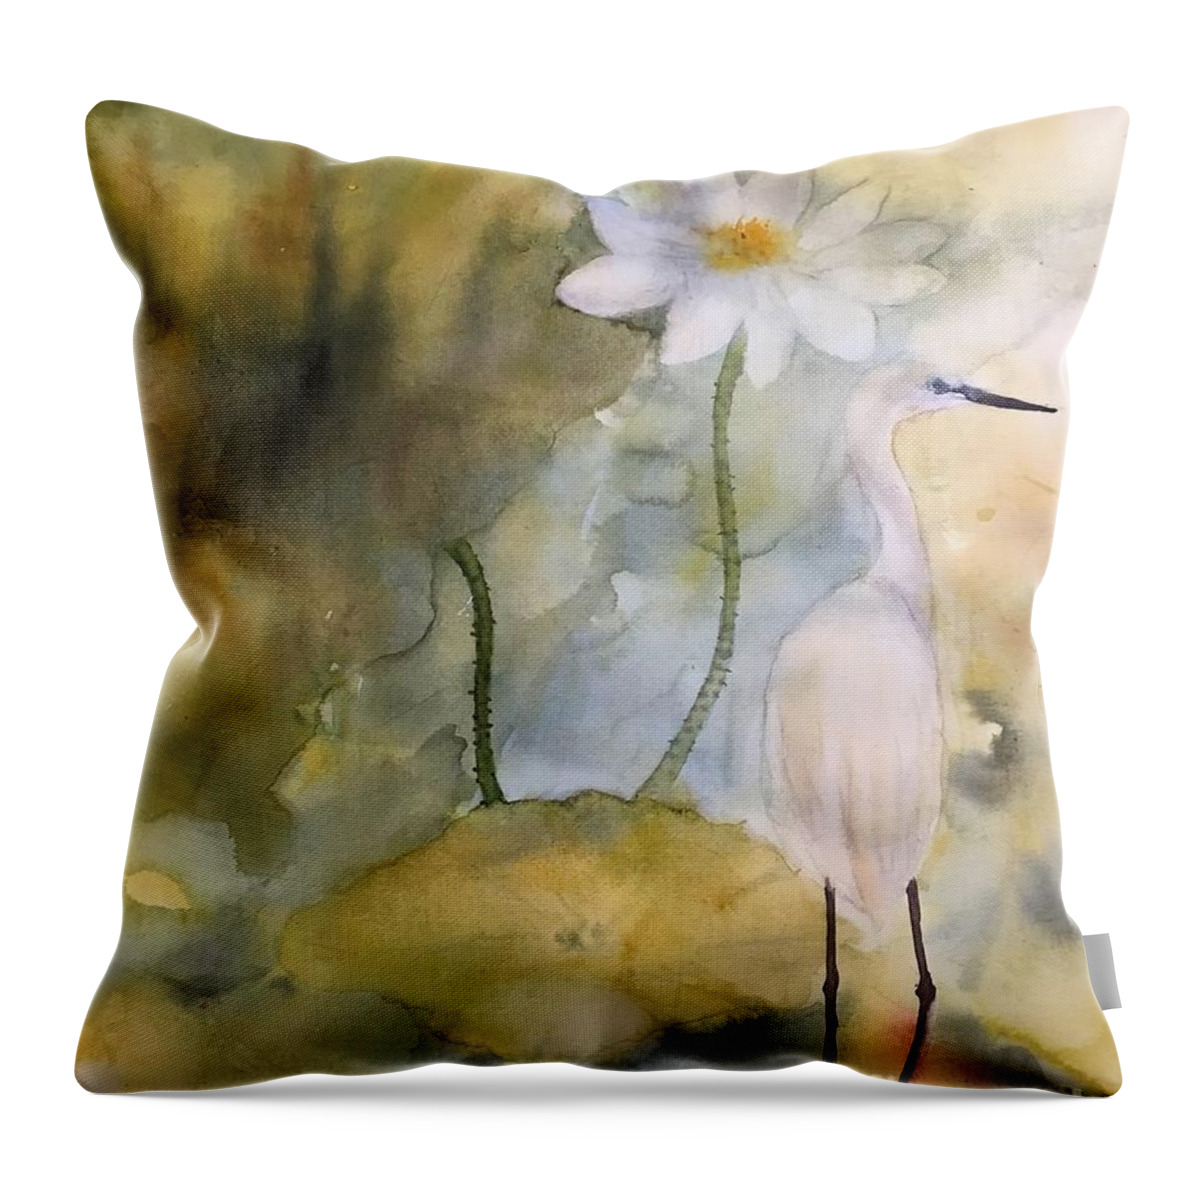 1192021 Throw Pillow featuring the painting 1192021 by Han in Huang wong